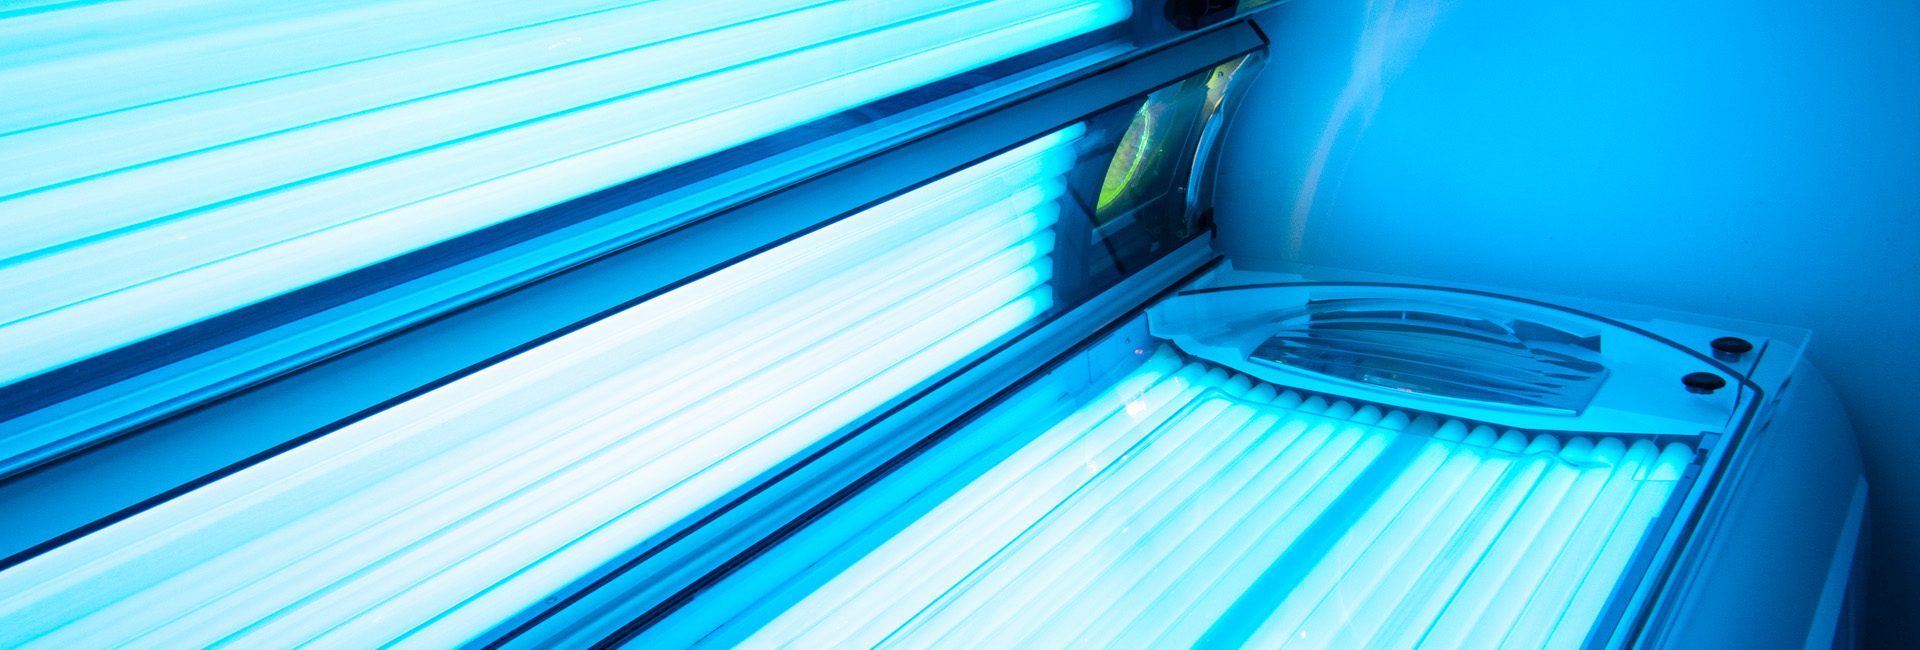 tanning bed at a gym near me in killian